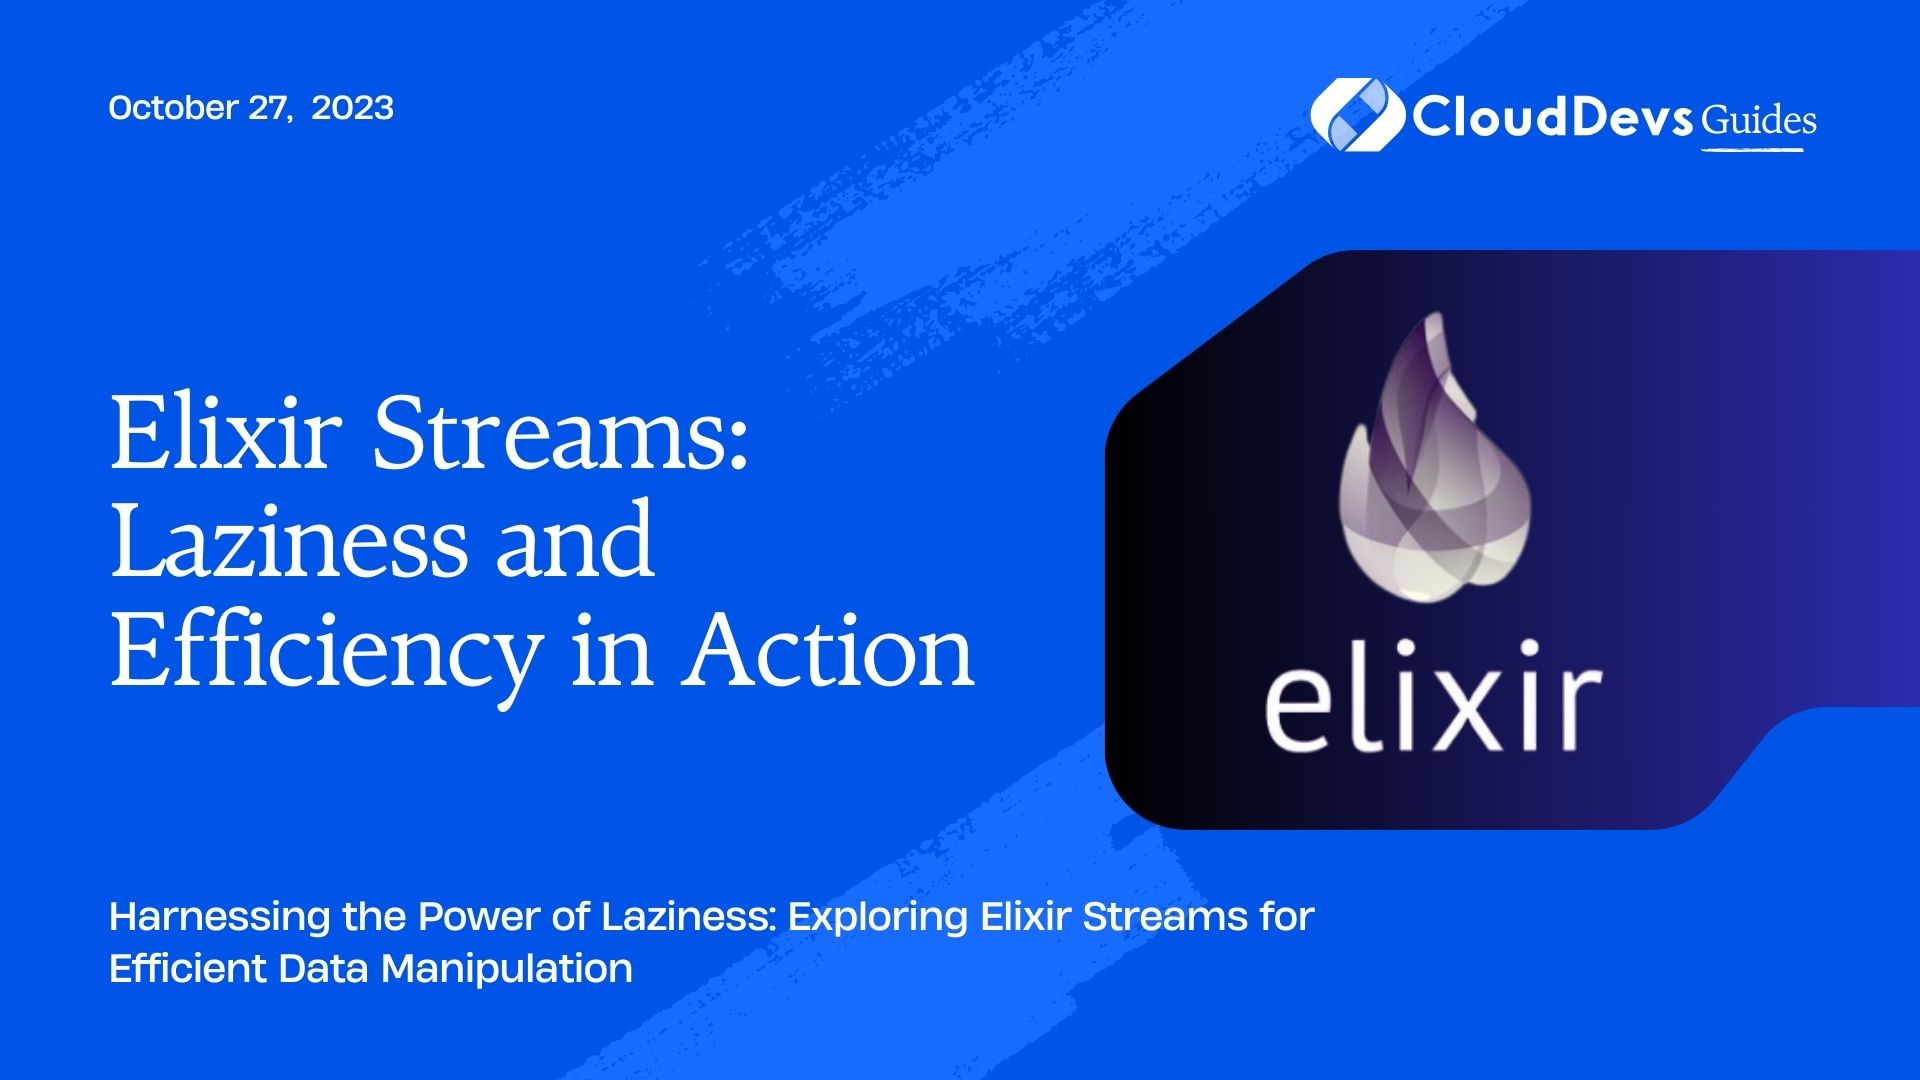 Elixir Streams: Laziness and Efficiency in Action